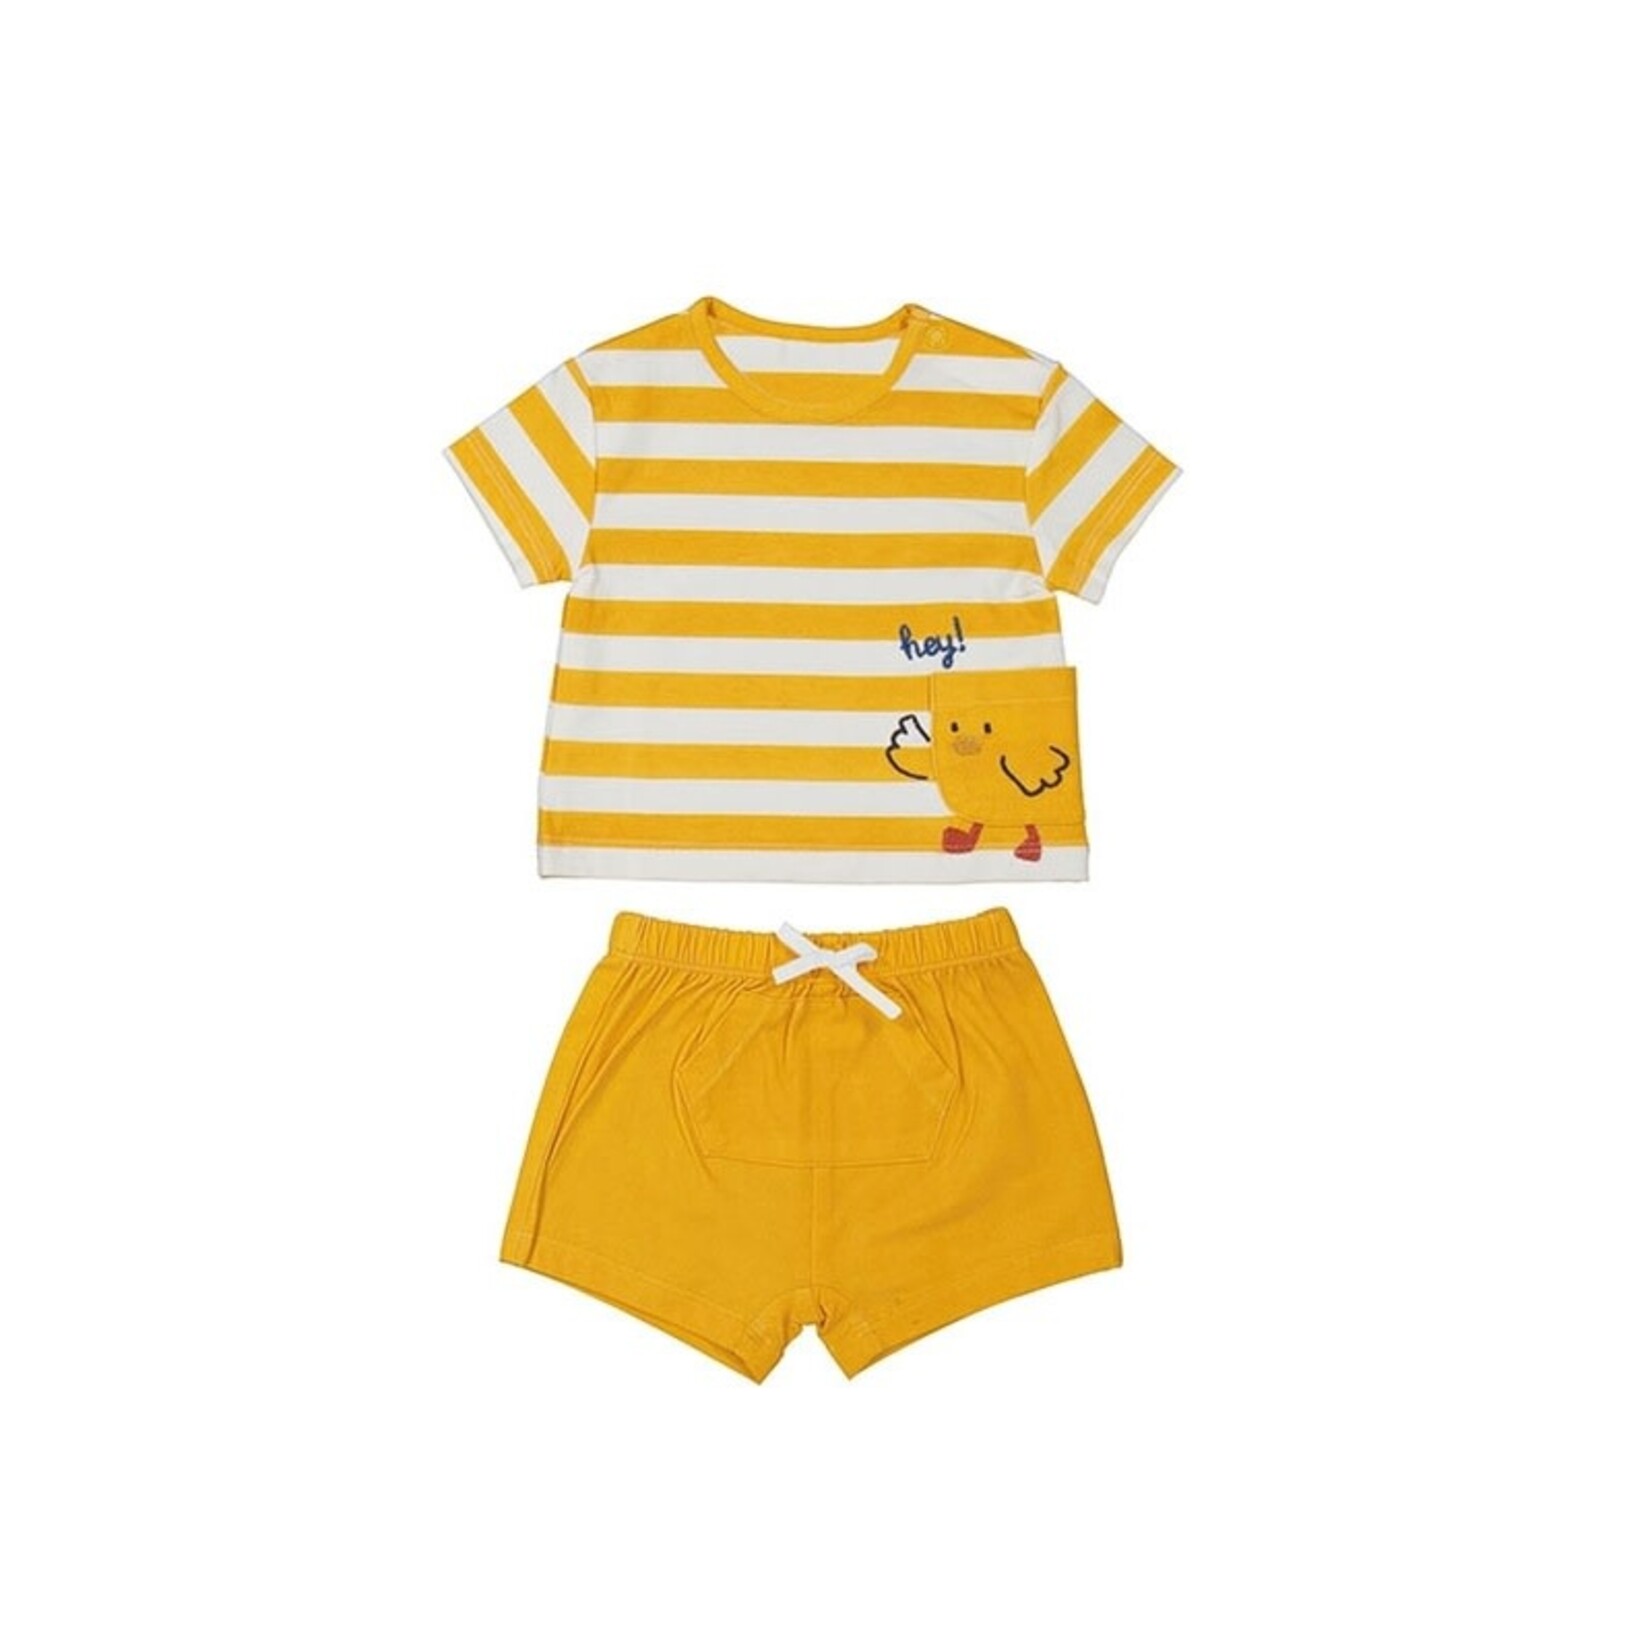 Mayoral MAYORAL - Two-piece Set - Yellow Striped T-Shirt with Duckling Pocket and Yellow Shorts